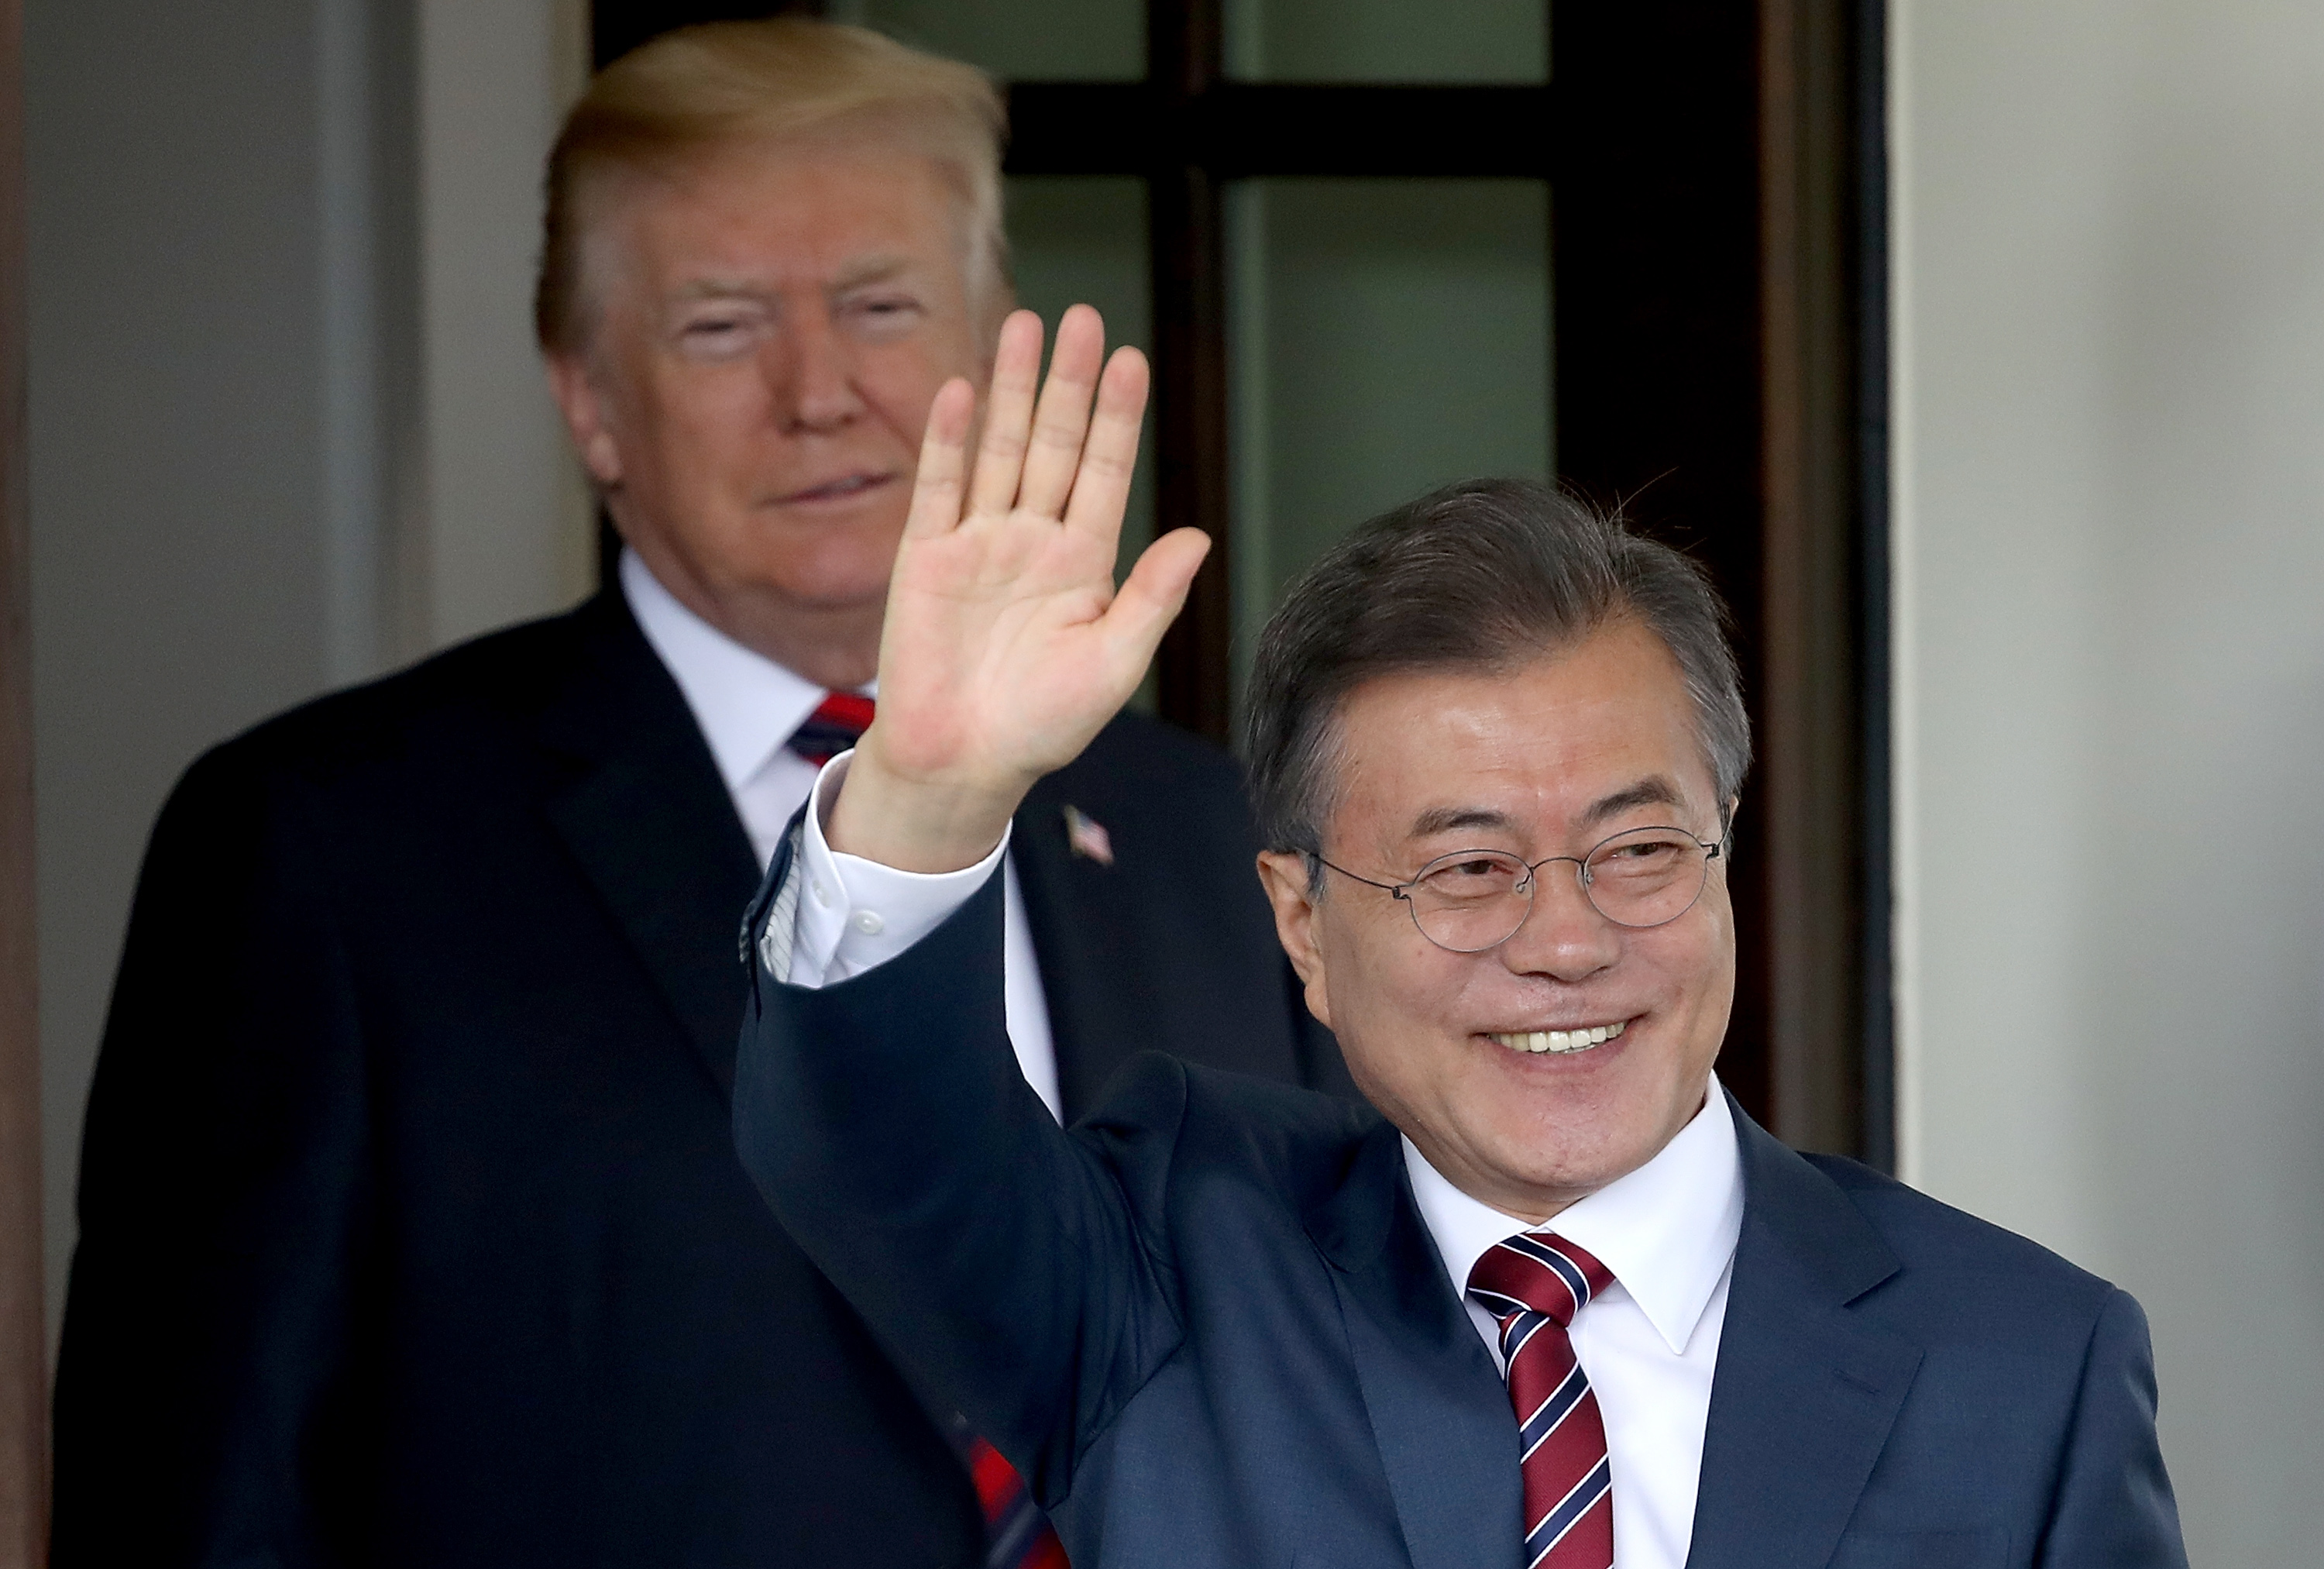 U.S. President Donald Trump (L) welcomes Republic of Korea President Moon Jae-in to the White House May 22, 2018 in Washington, DC. (Win McNamee—Getty Images)